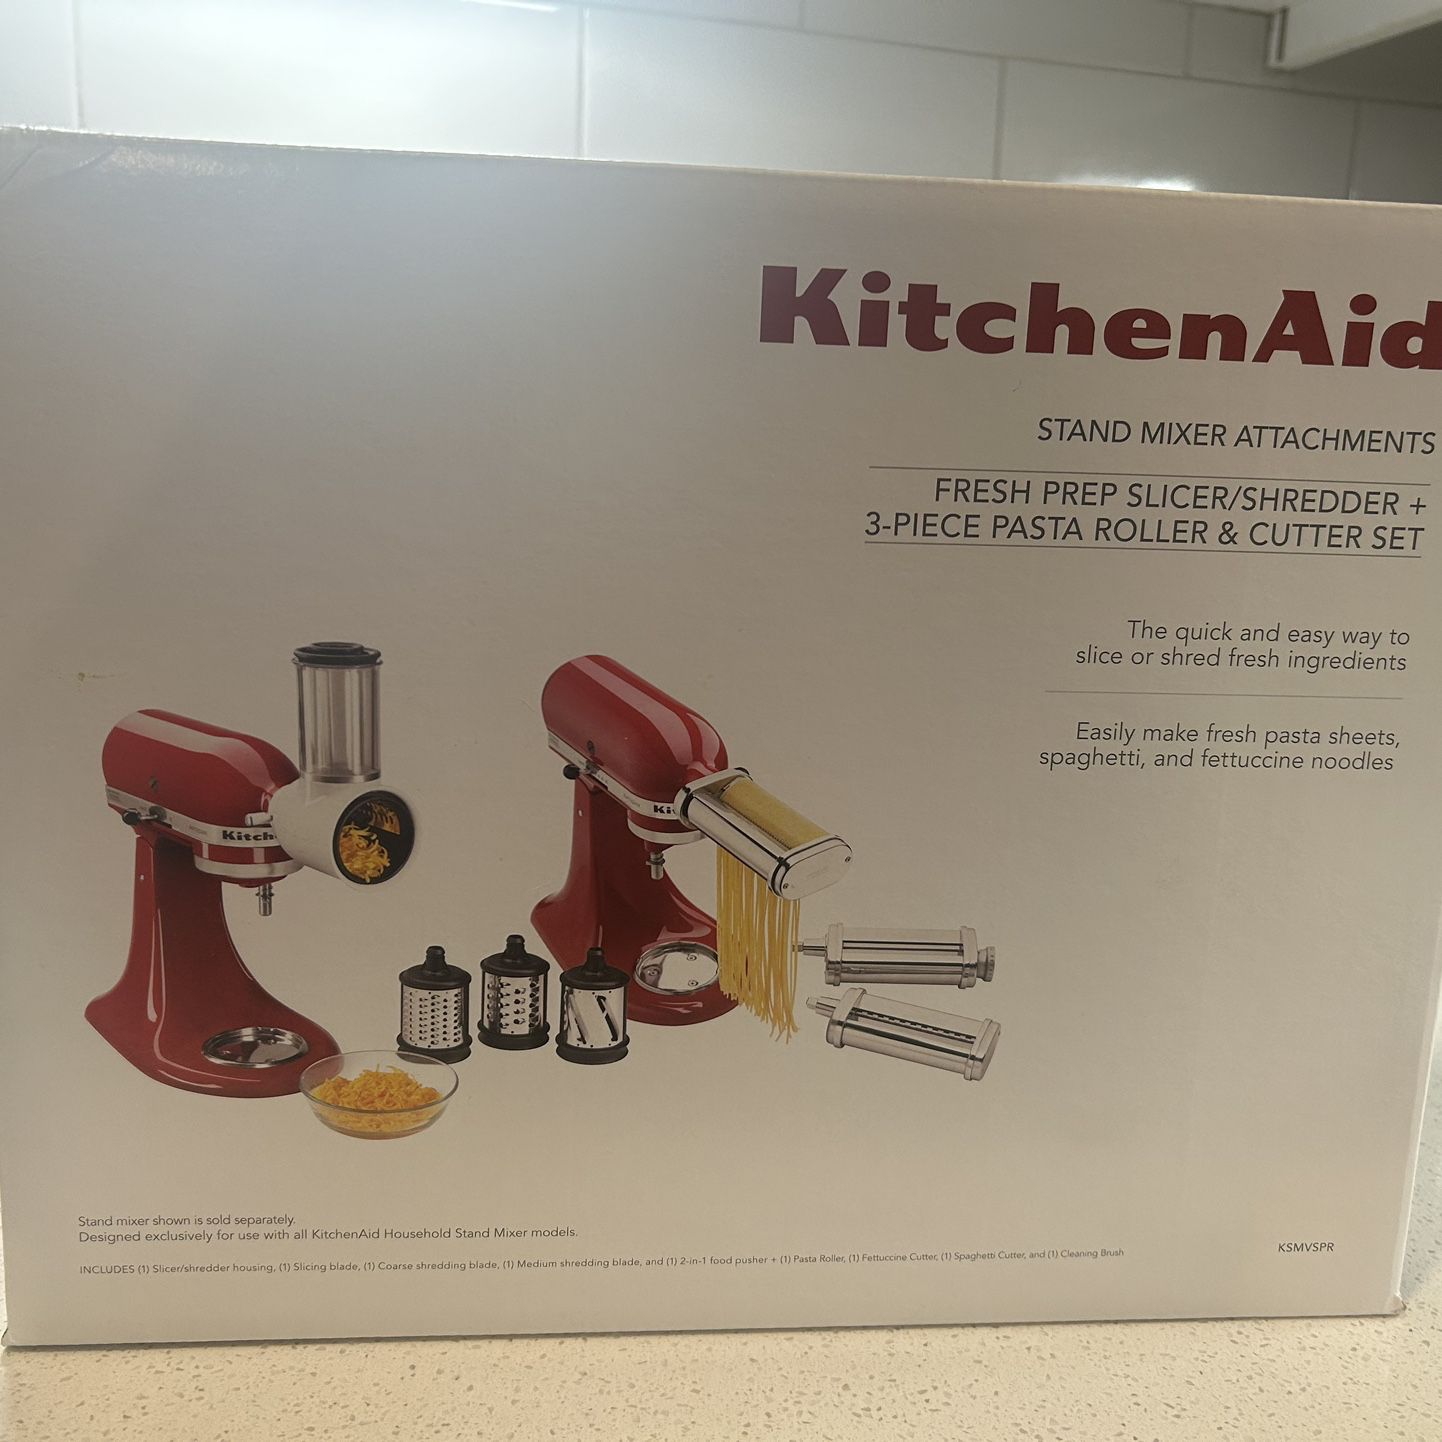 Attachments for KitchenAid stand mixer, set of 3 pcs, slicer and